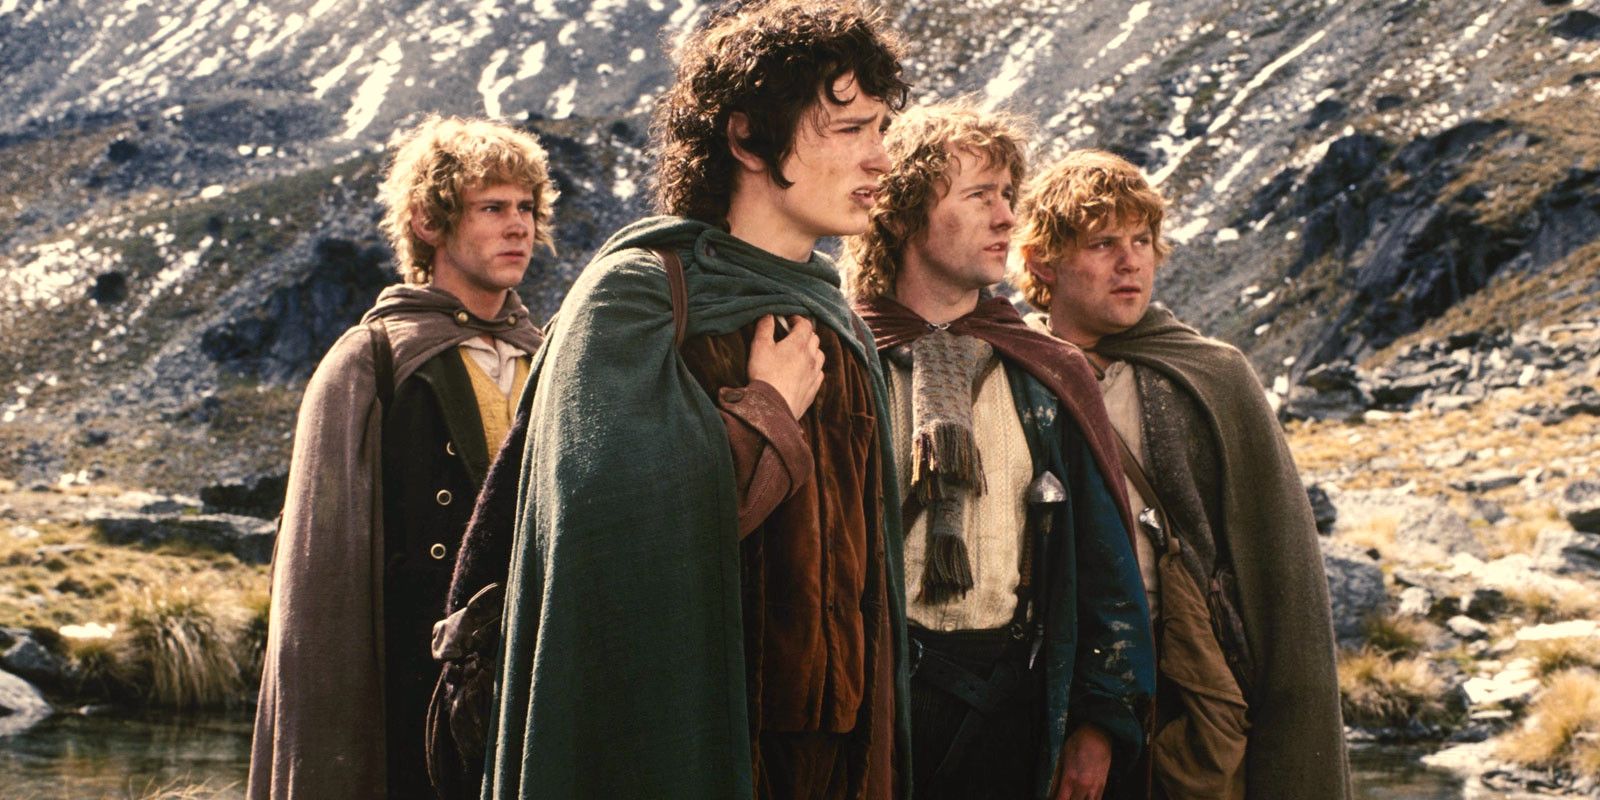 The four hobbits in The Lord of the Rings trilogy